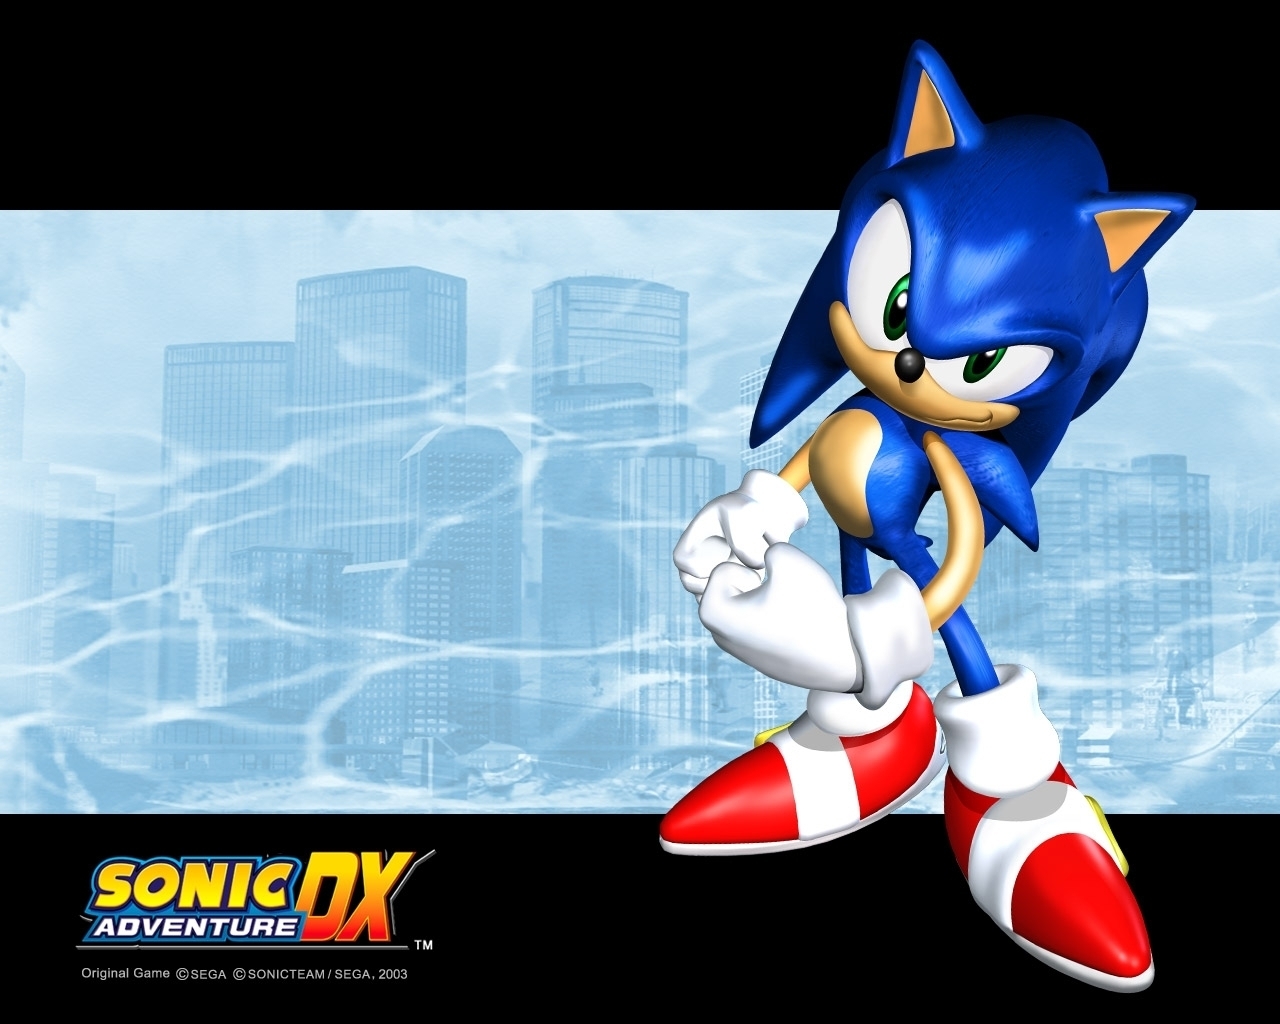 huge-sonic-fan images sonic adventure dx hd wallpaper and background